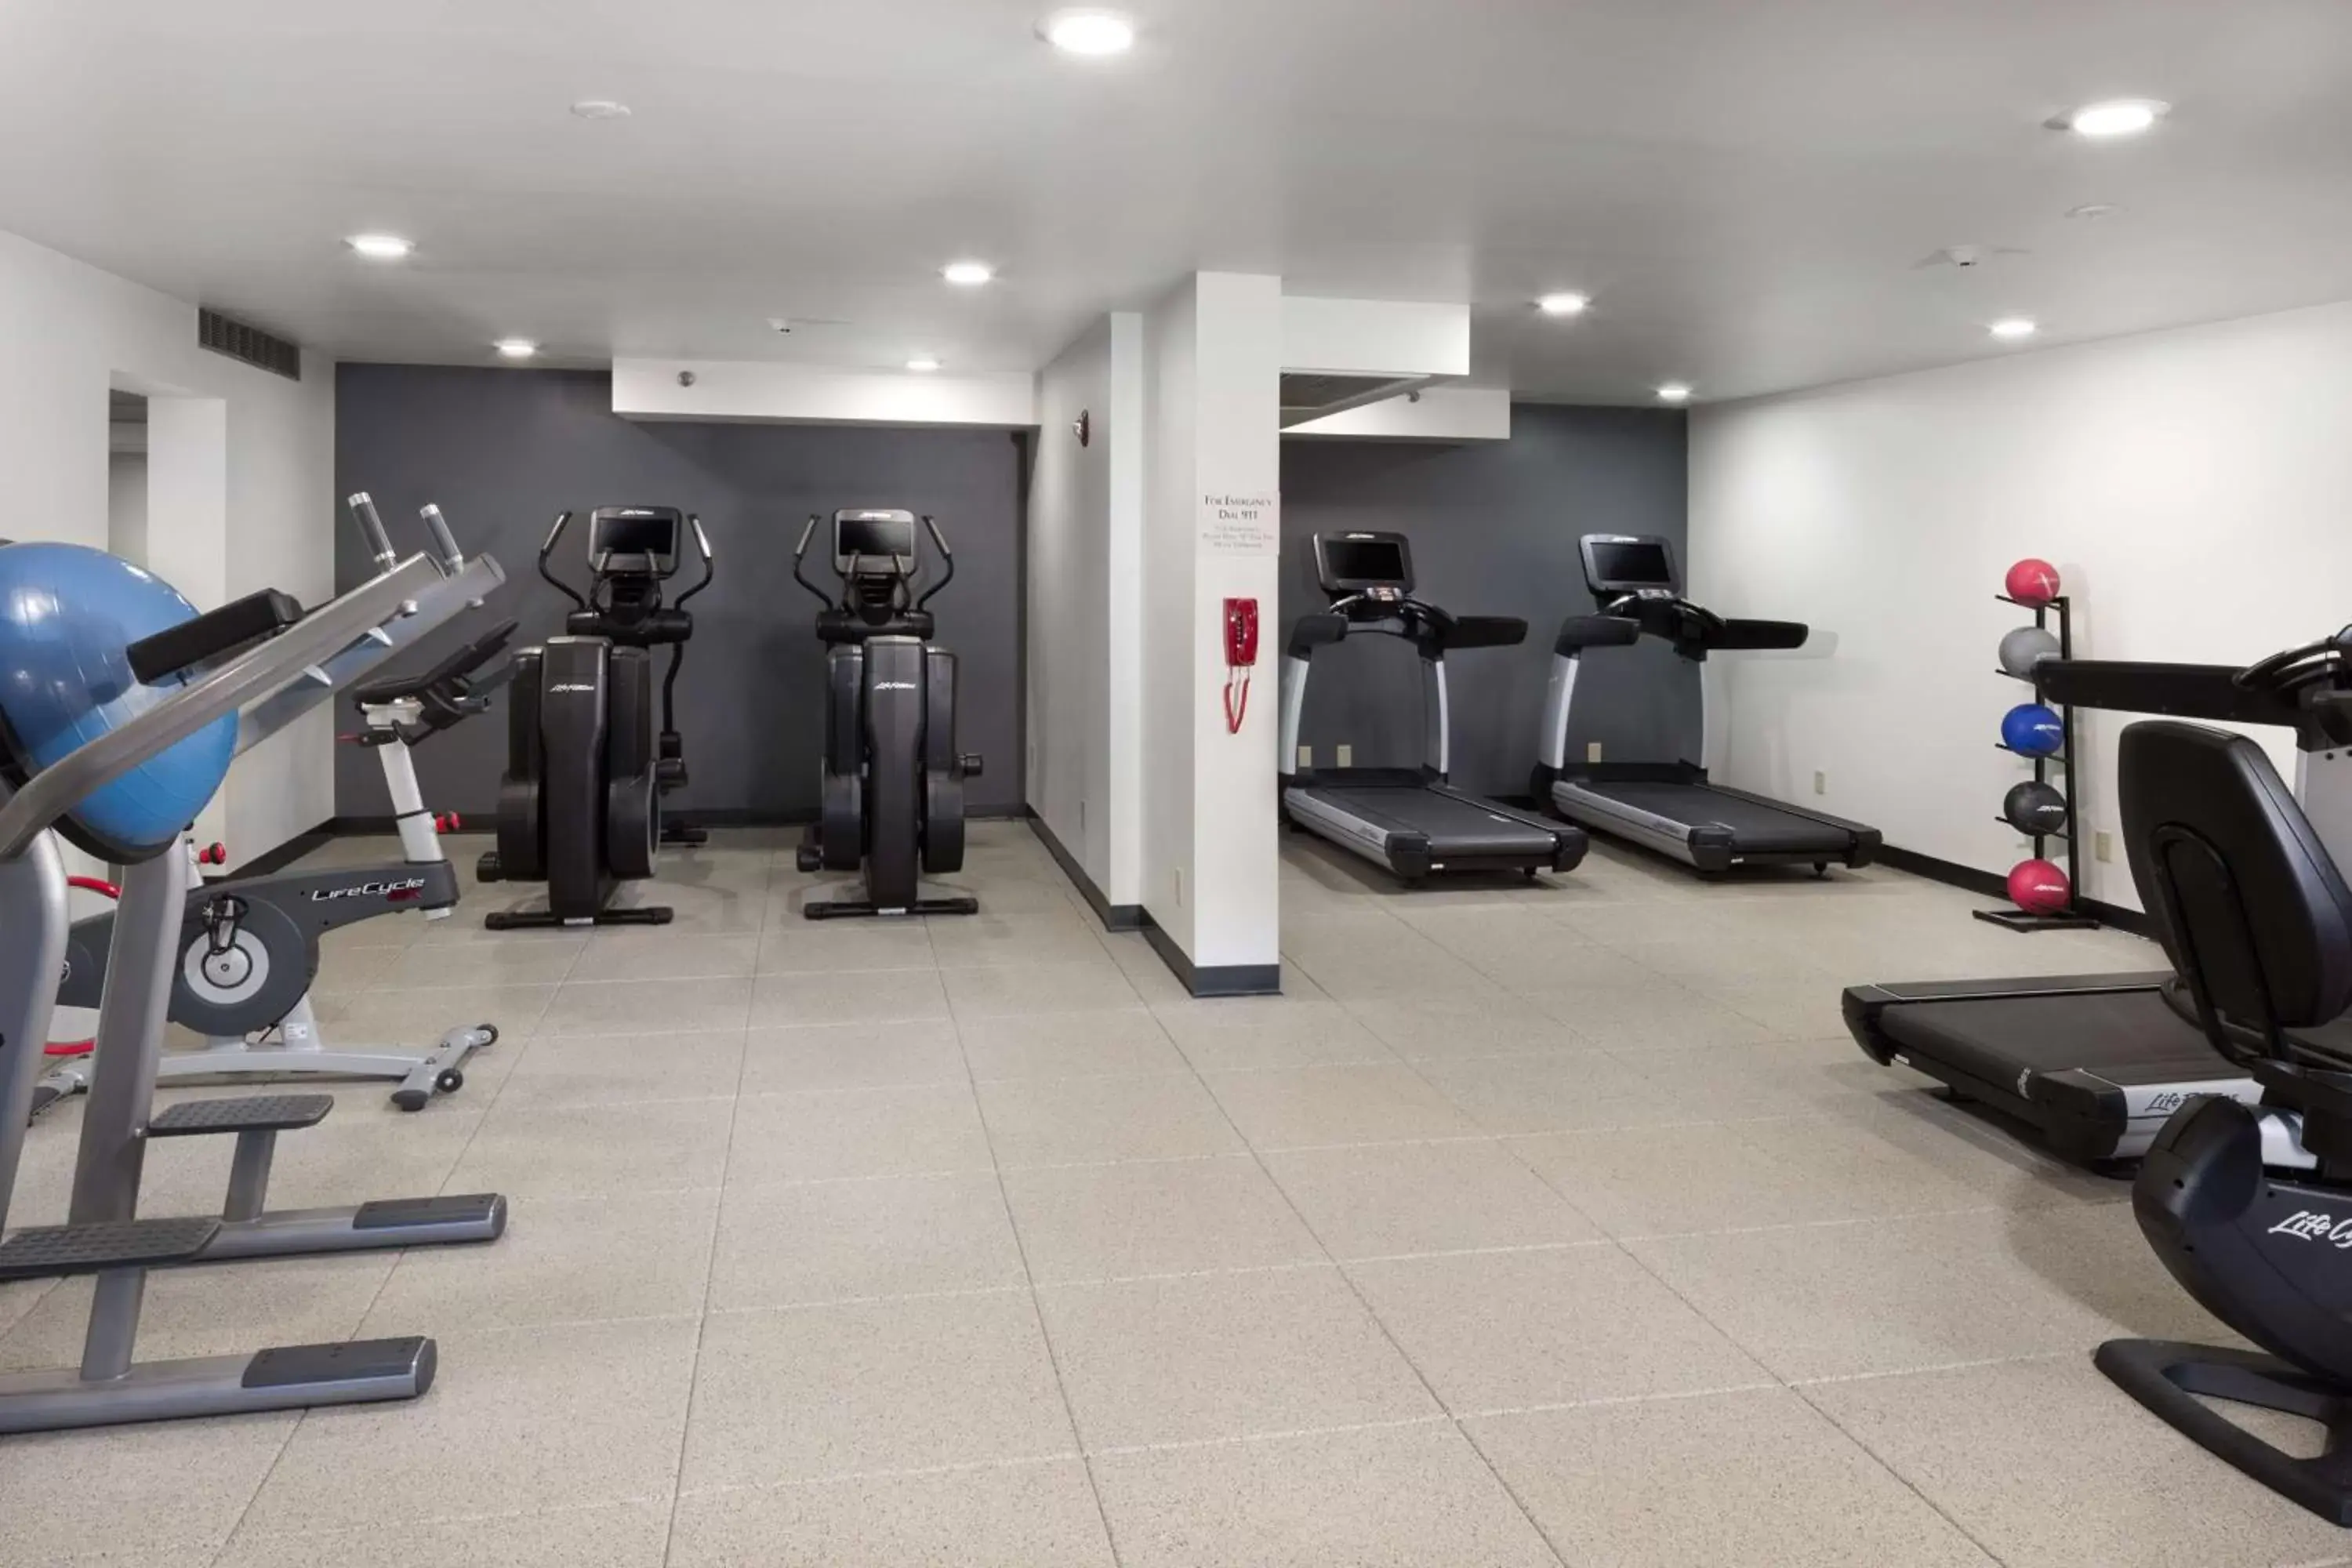 Fitness centre/facilities, Fitness Center/Facilities in DoubleTree by Hilton Lawrence